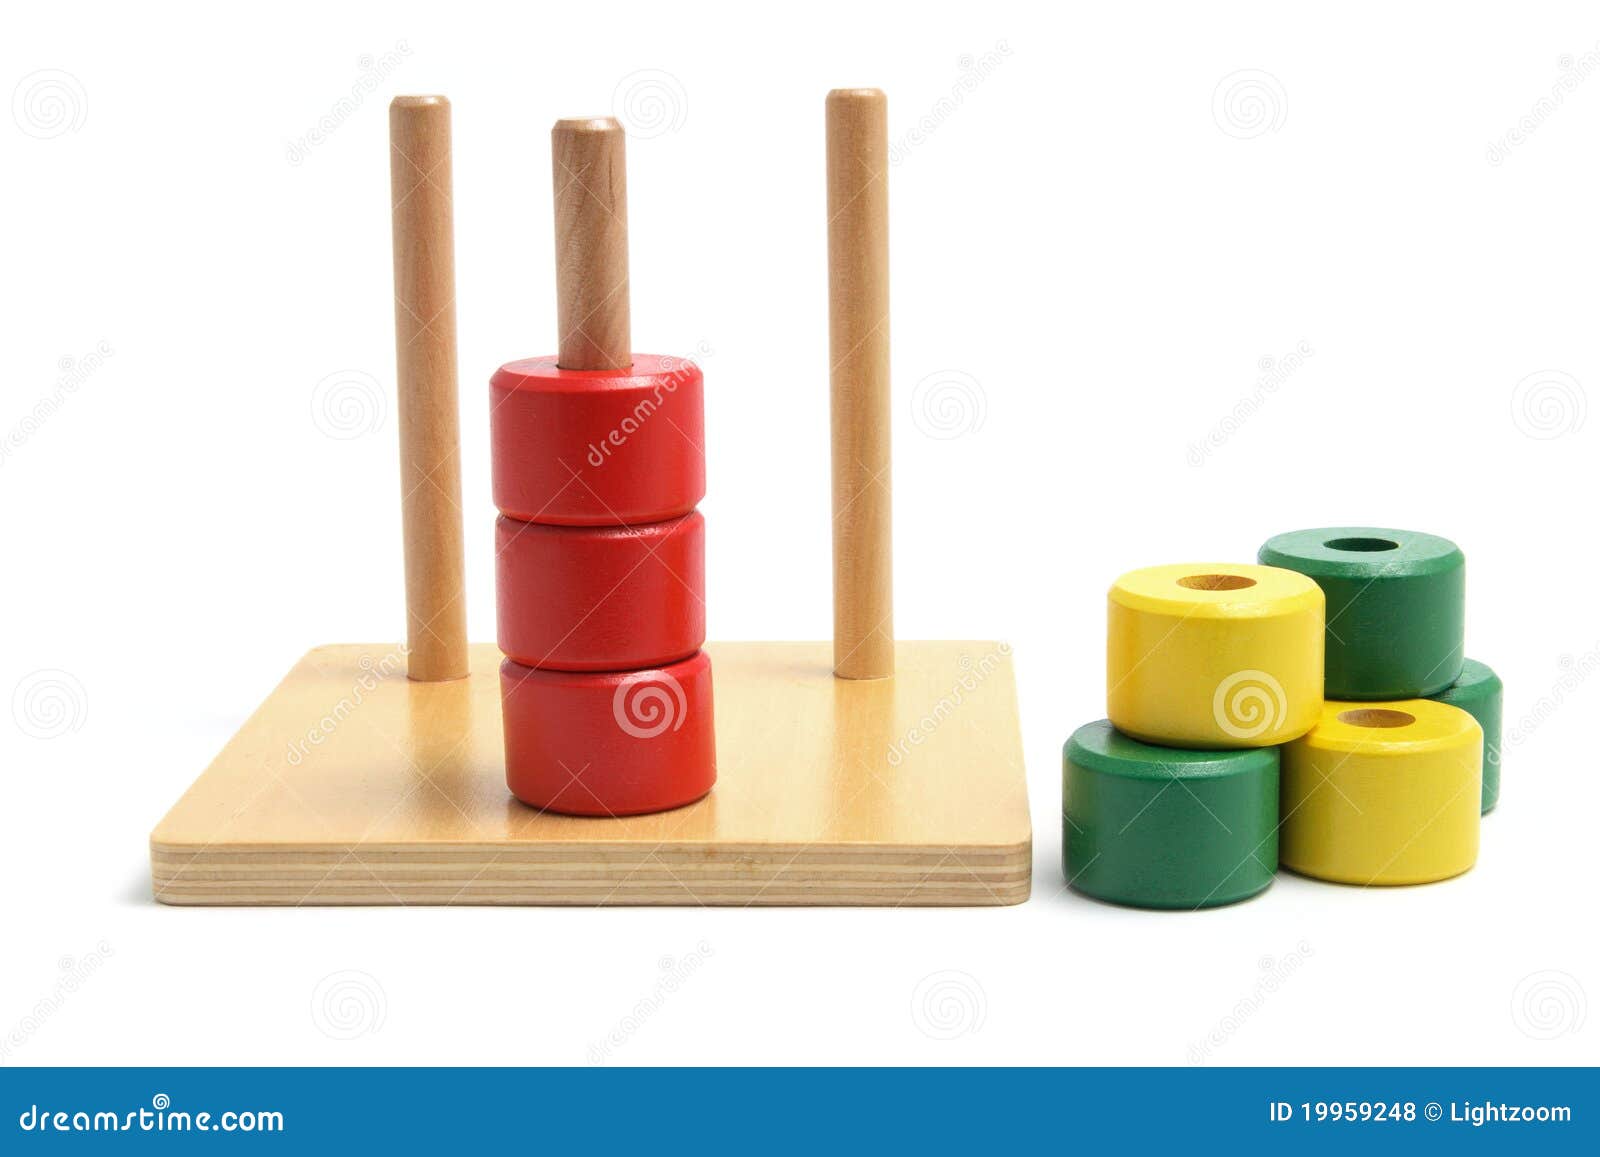 wooden stack and sort toy